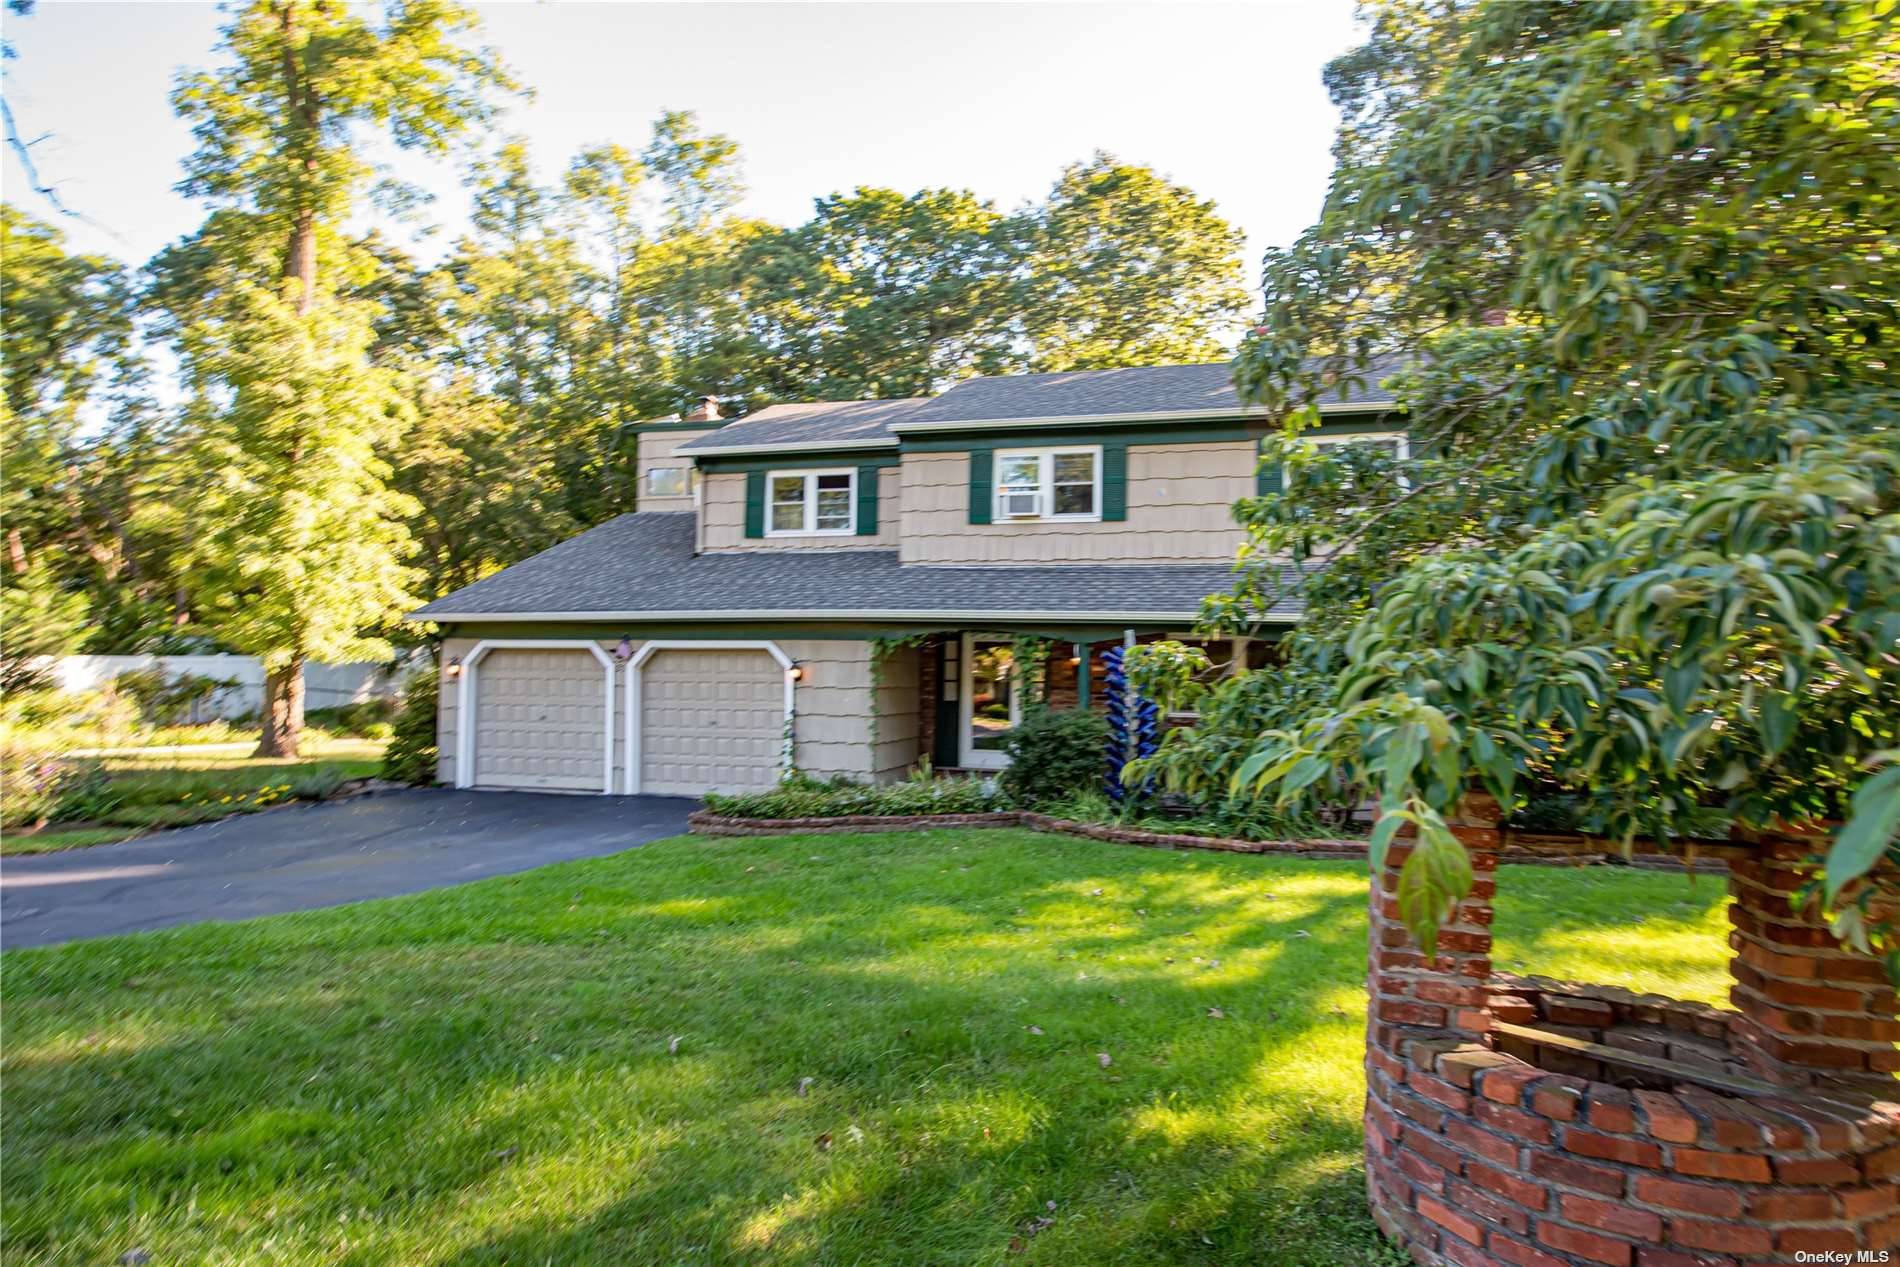 Expanded Center Hall Colonial In Beautiful Neighborhood In N Shoreham.